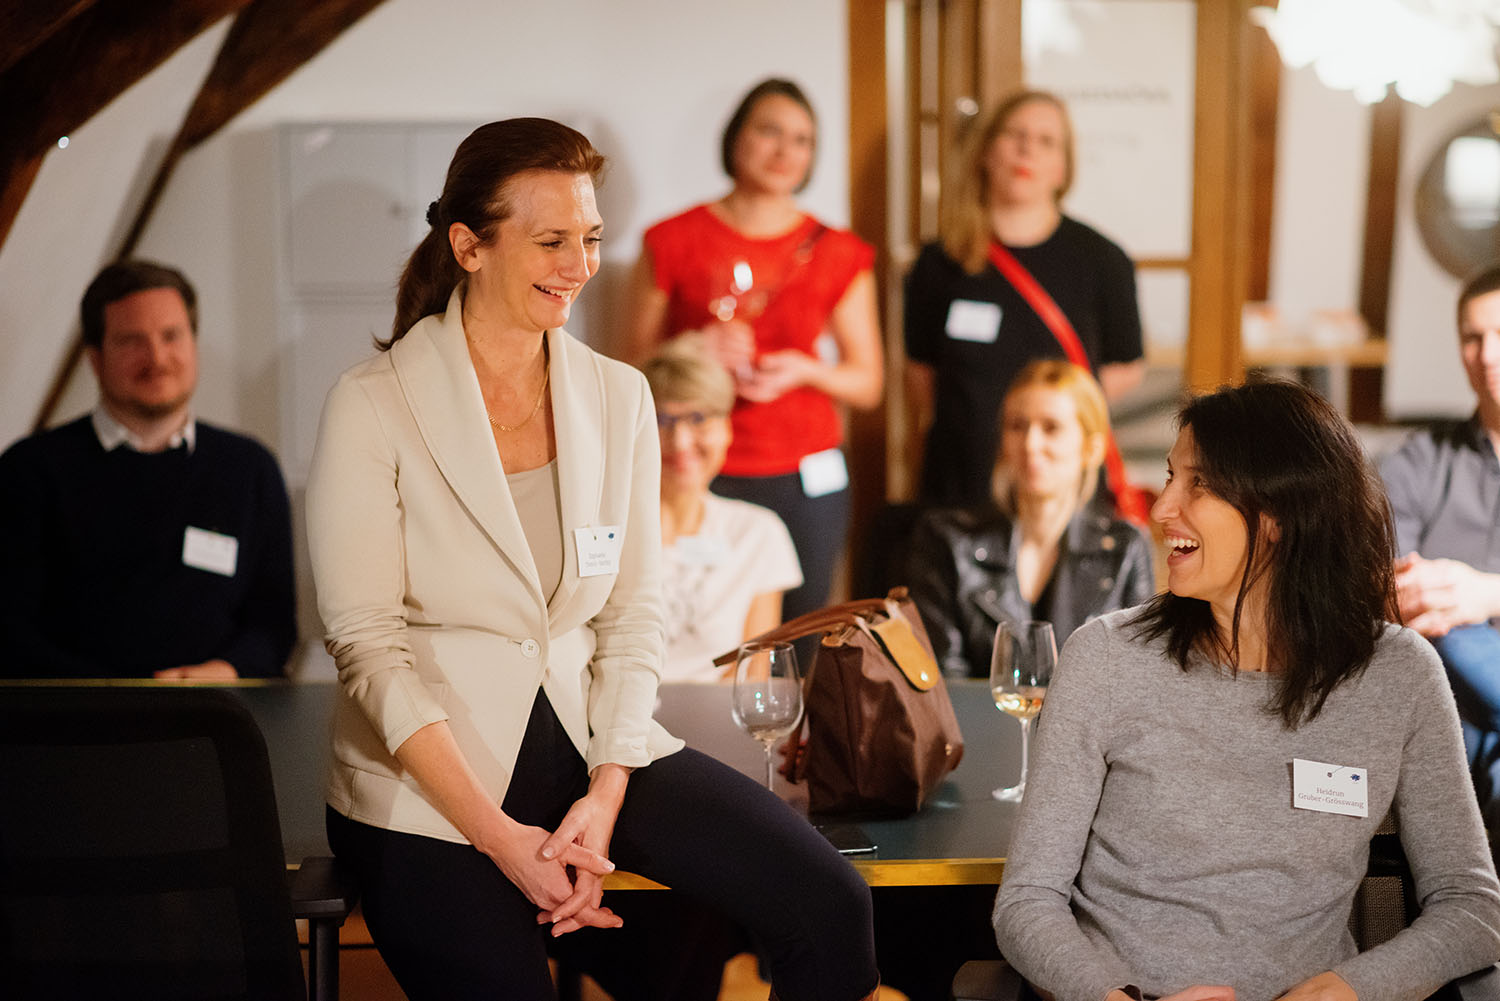 Evening session in the program cohort, with team spirit and inspiring insights. Image depicts two women sitting in the foreground and smiling at each other, and other people in the background of the room.